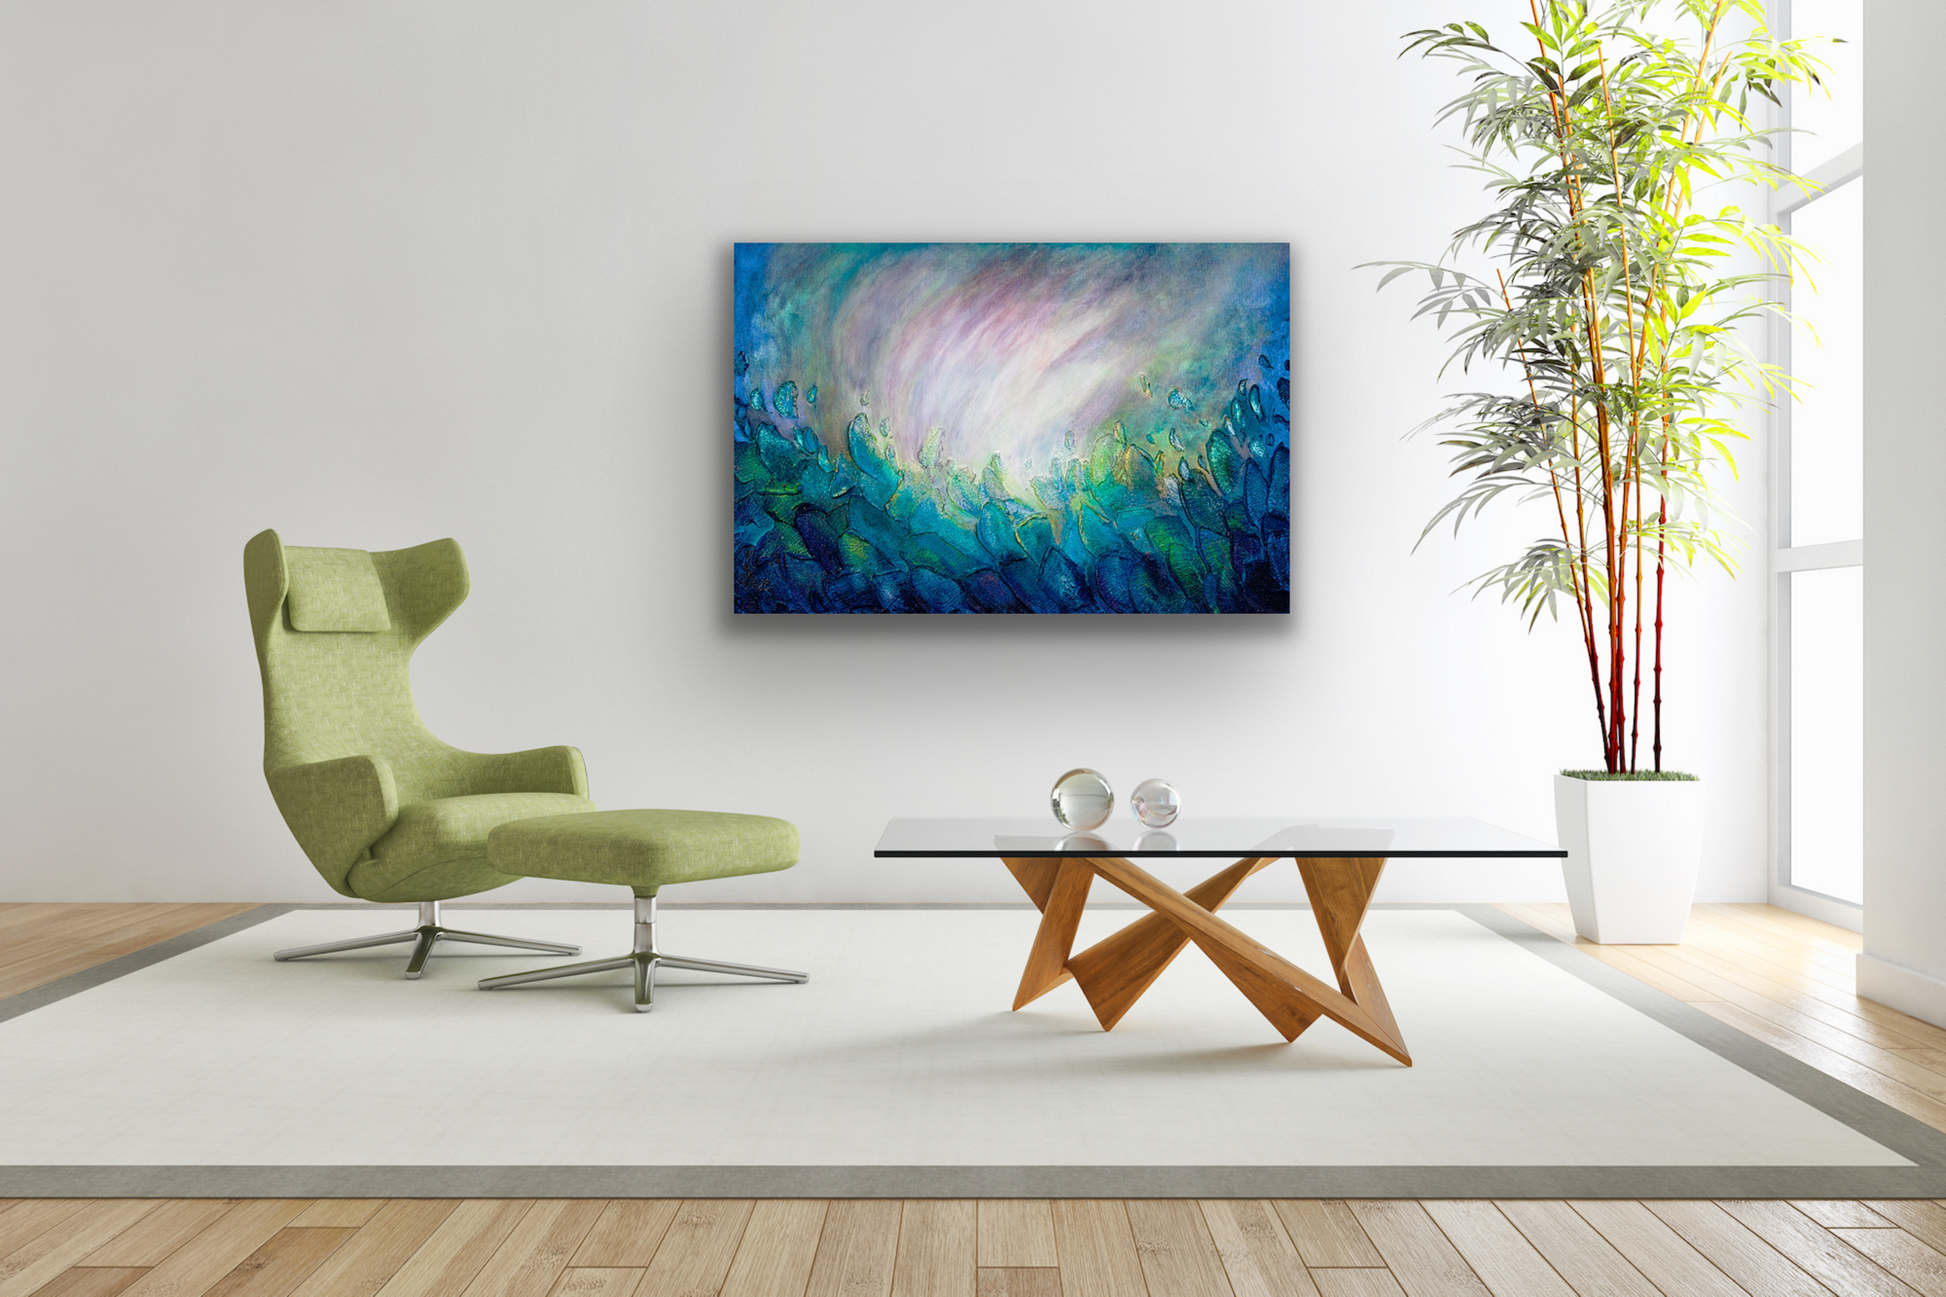 "Turbulence" art work comes in five different canvas print sizes to fit your wall perfectly.